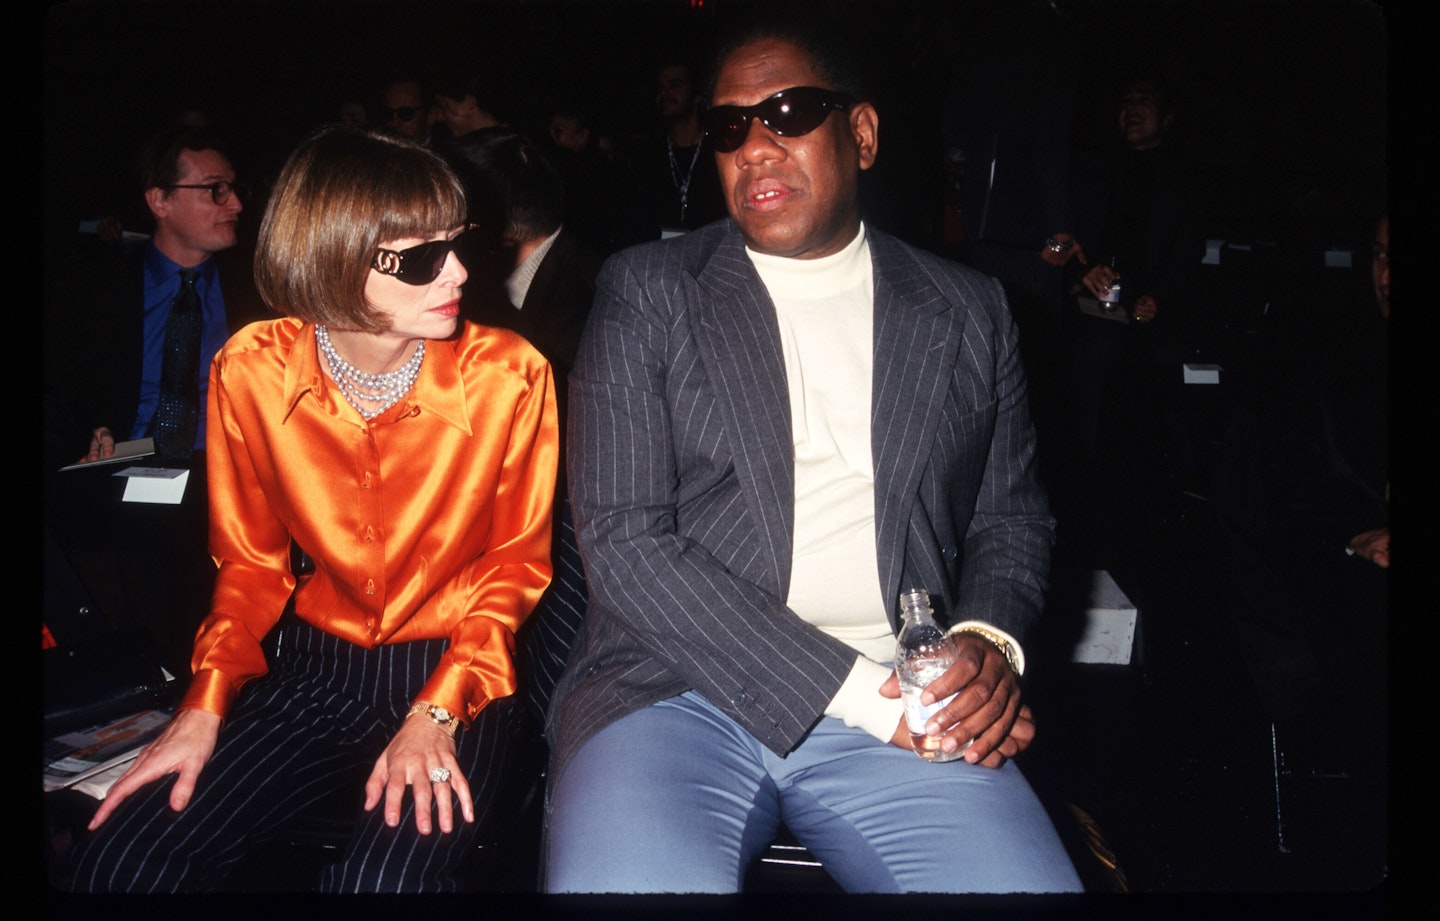 Andru00e9 Leon Talley: His Extraordinary Life In Pictures